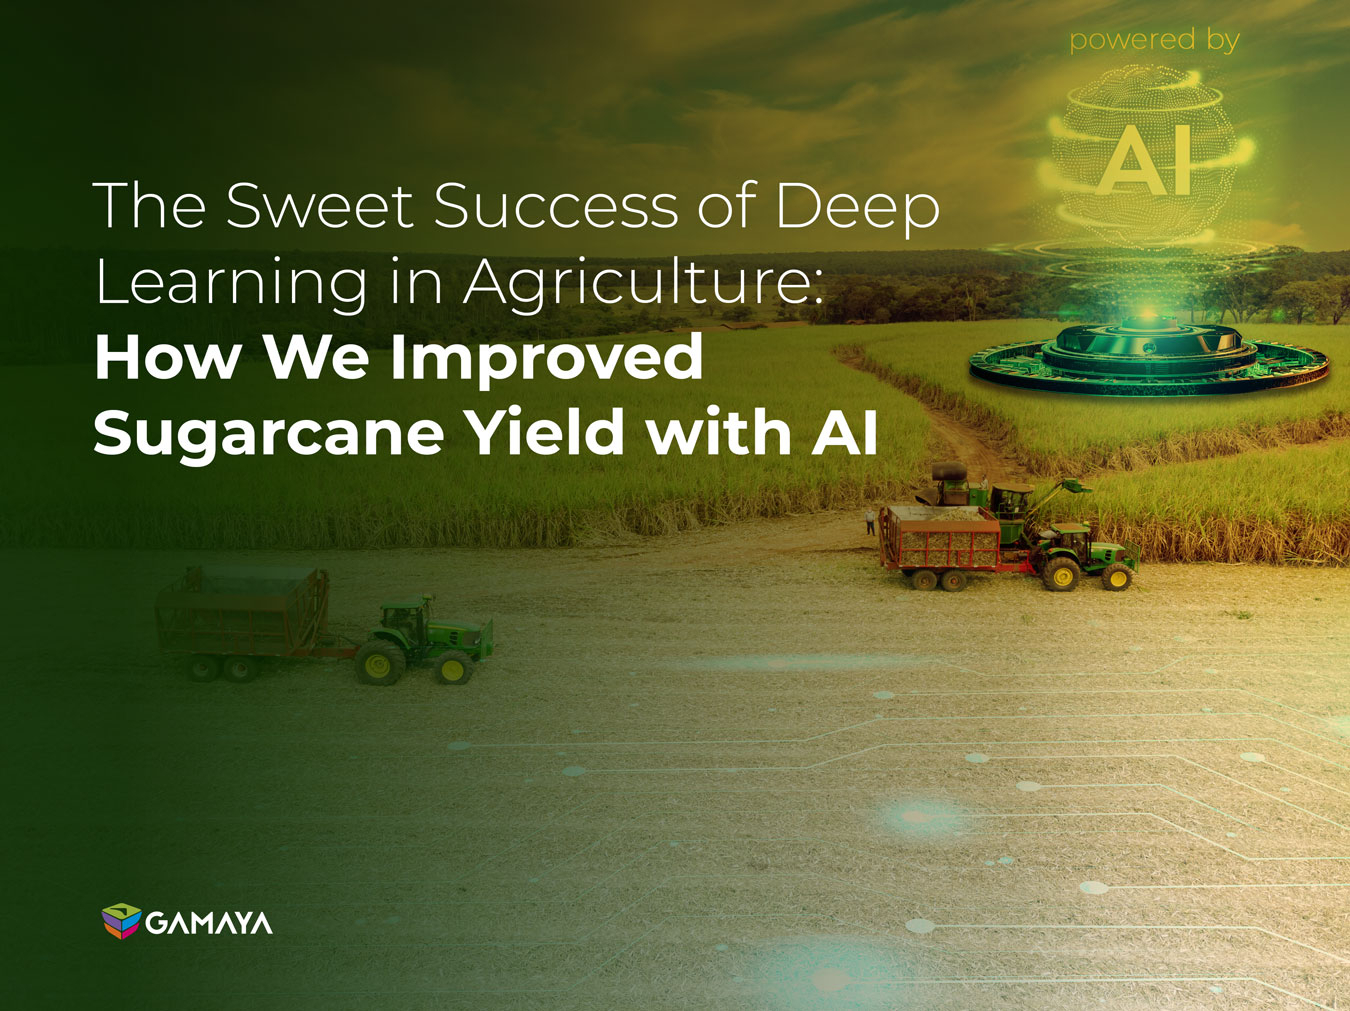 The Sweet Success of Deep Learning in Agriculture: How We Improved Sugarcane Yield with AI.